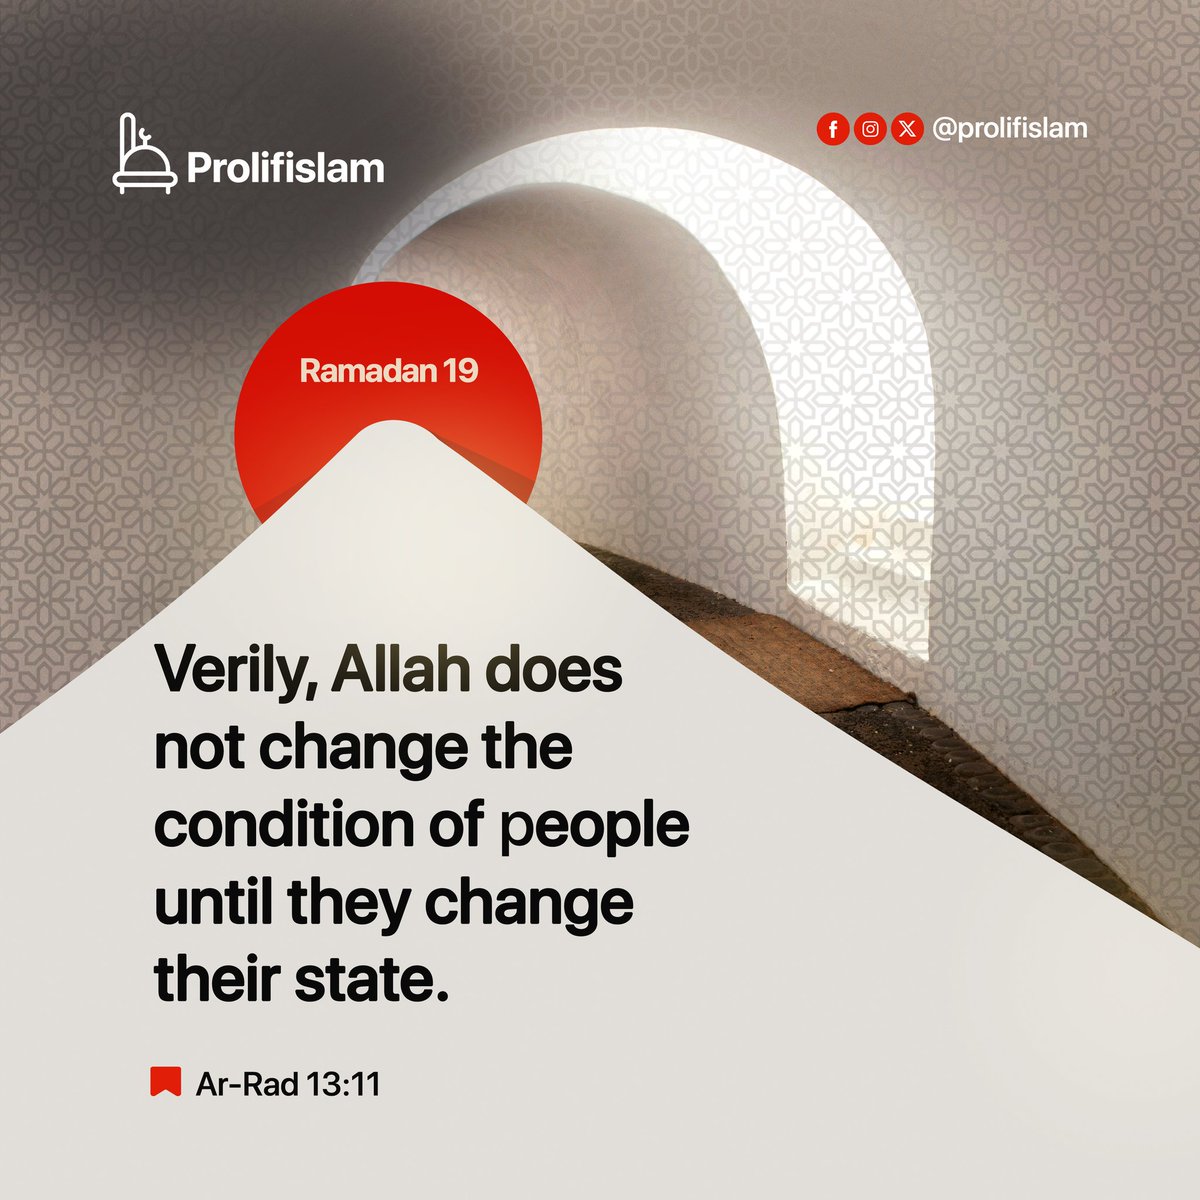 On the 19th day of Ramadan, let's ponder upon the wisdom of Ar-Rad 13:11: 'Verily, Allah does not change the condition of people until they change their state.' This verse serves as a reminder that true transformation begins from within.